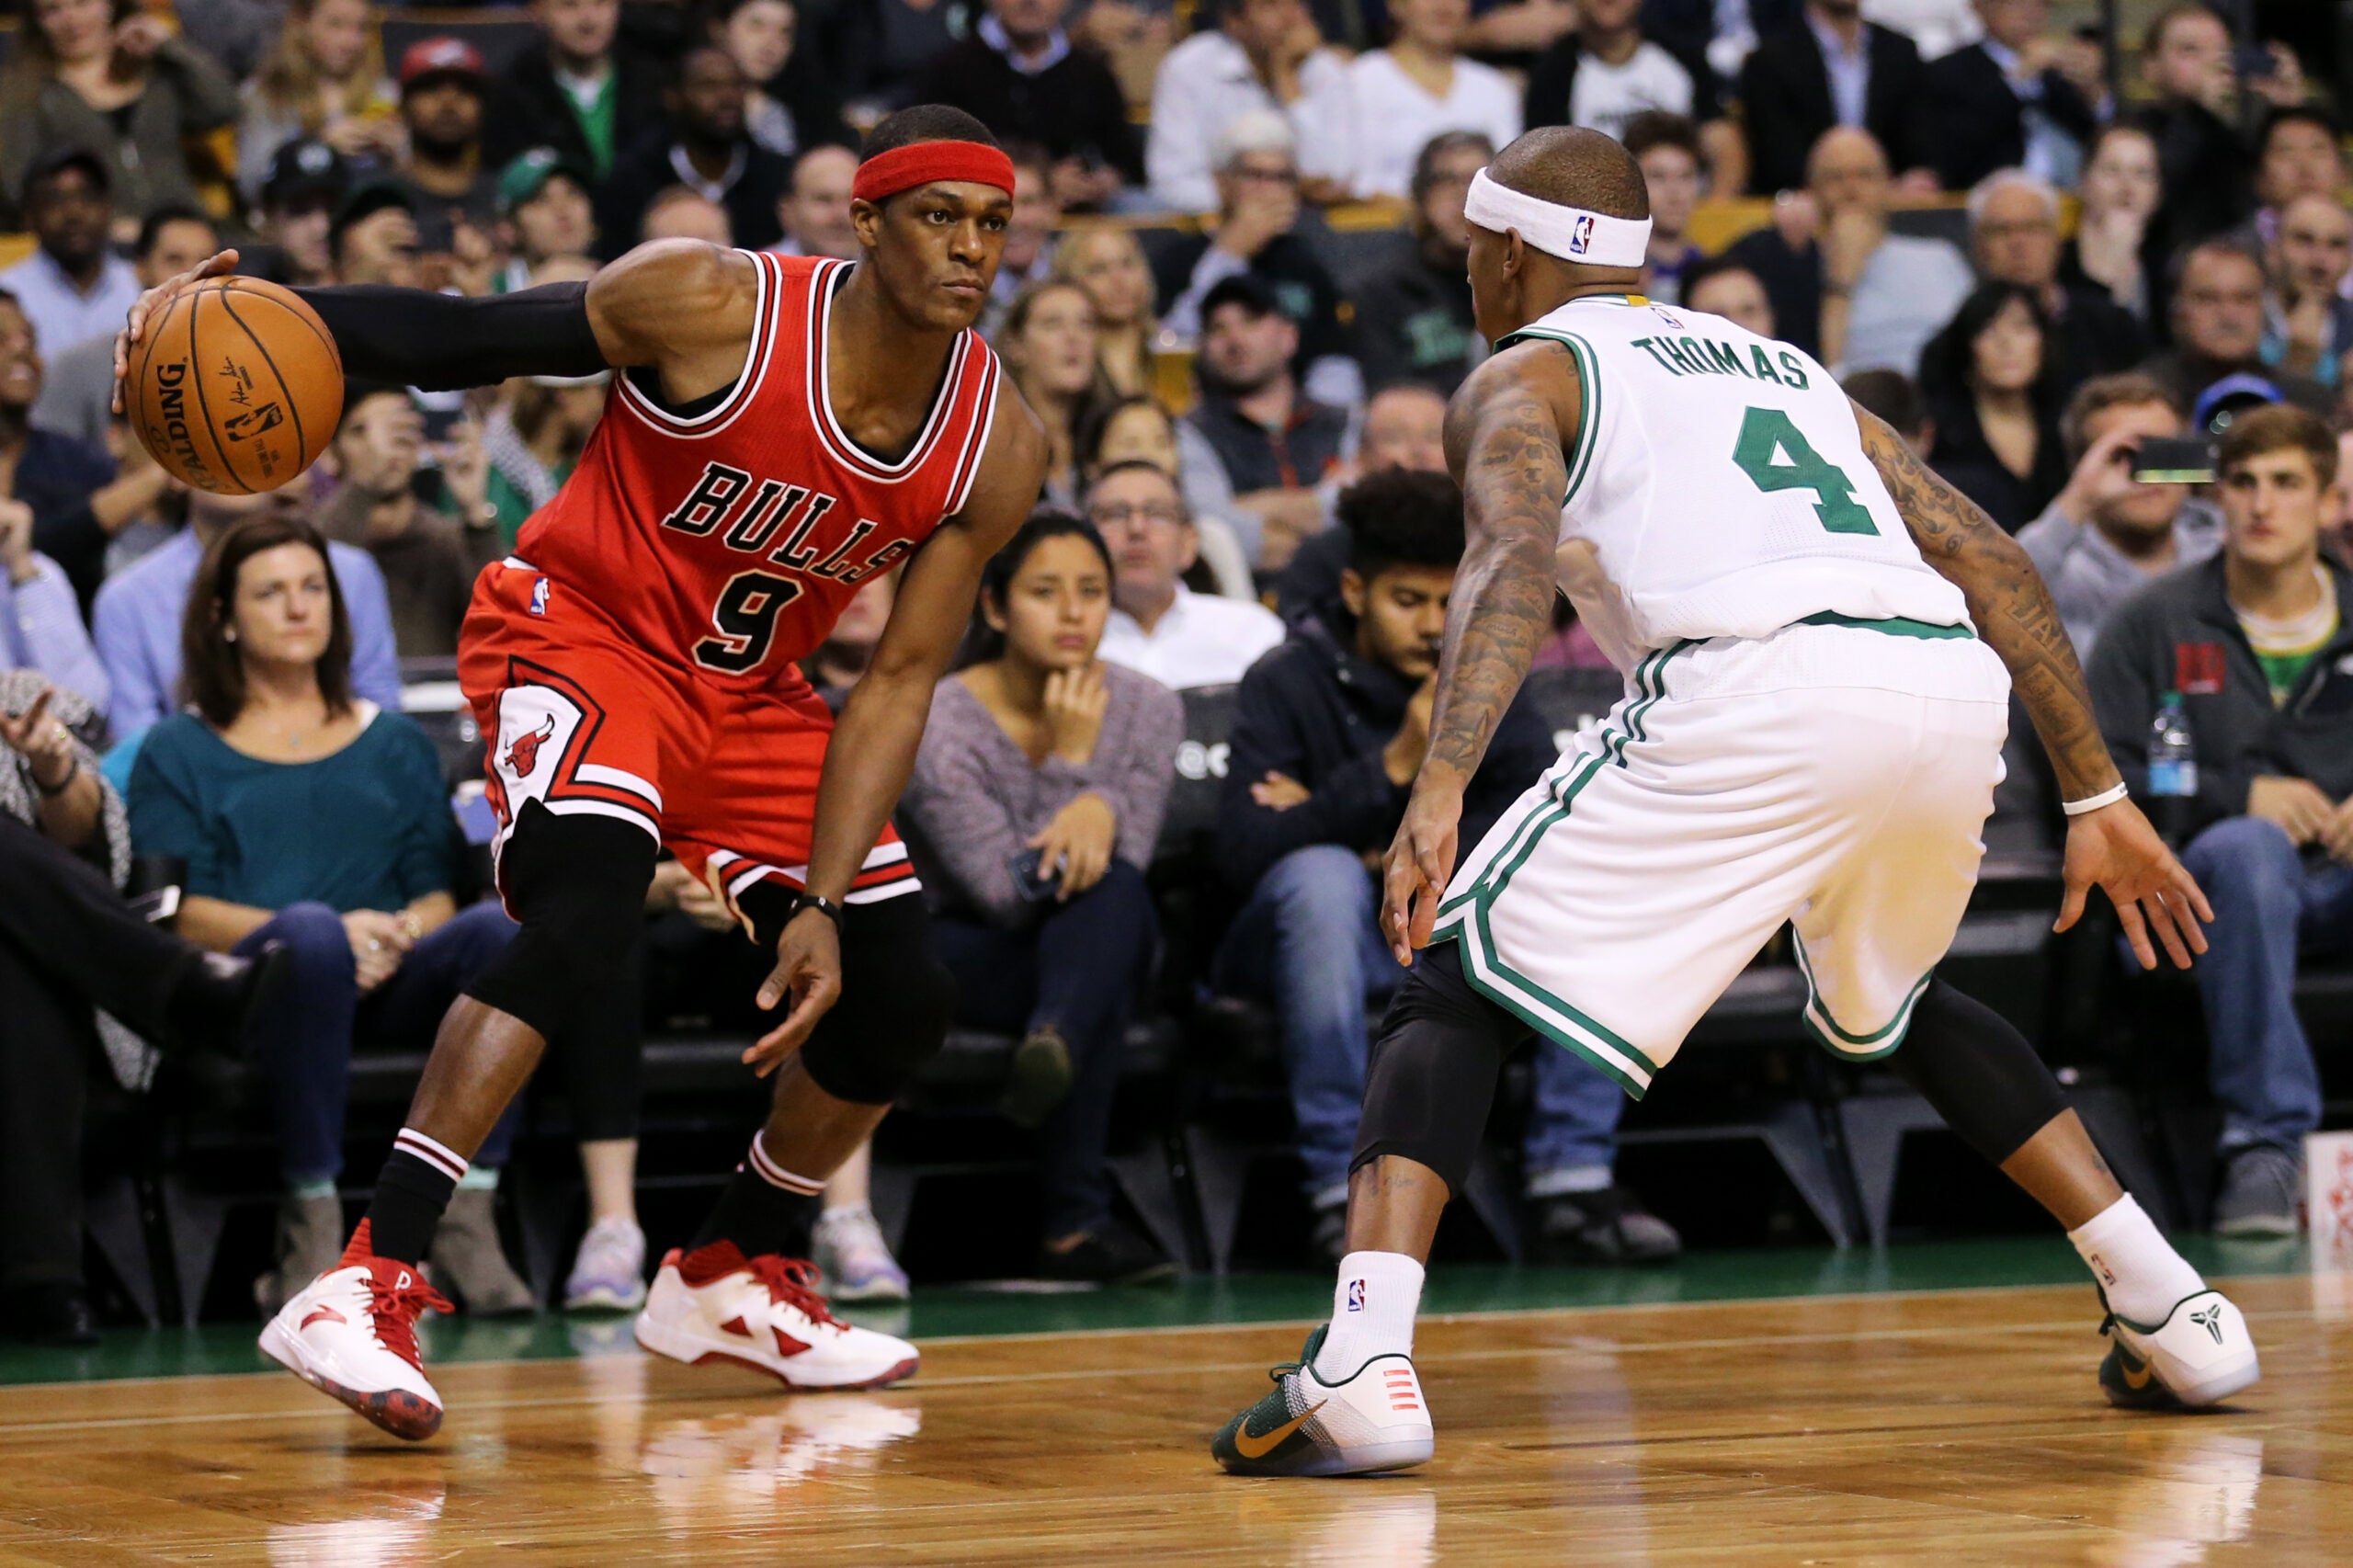 Rajon Rondo Ordered To Stay Away From Family After Pulling Gun On